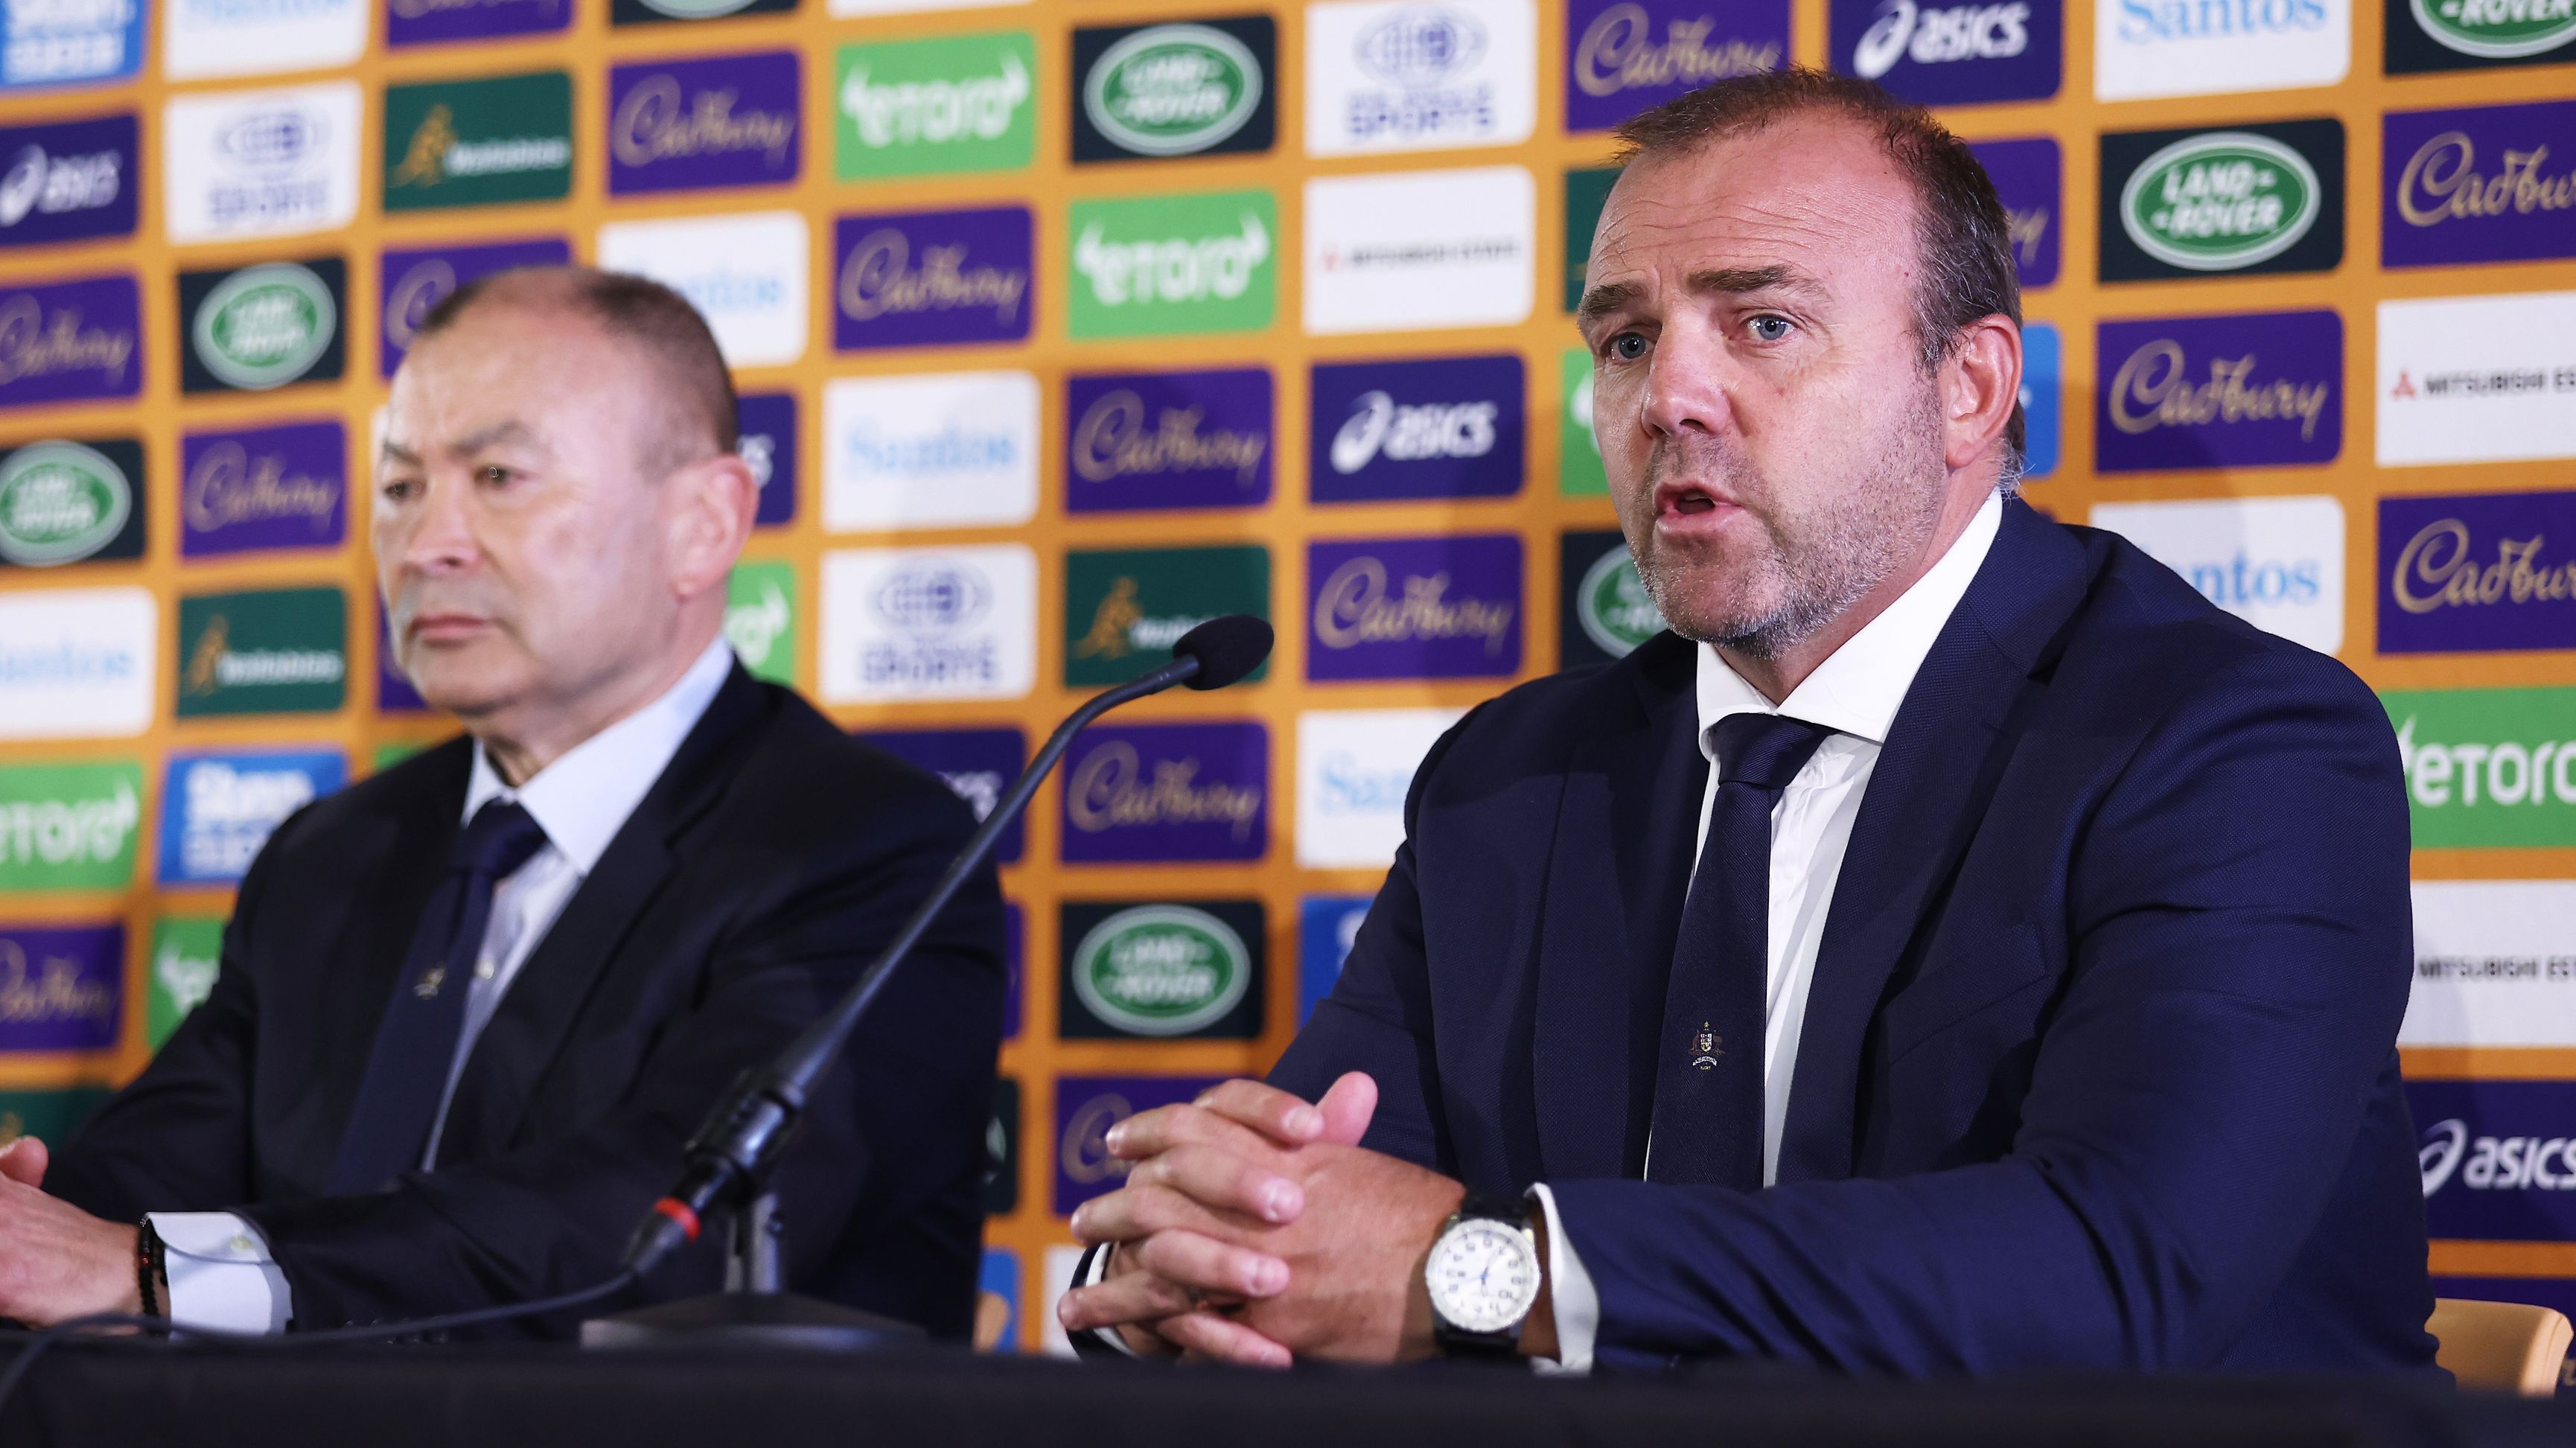 Rugby Australia CEO Andy Marinos (right) speaks to the media during a press conference.